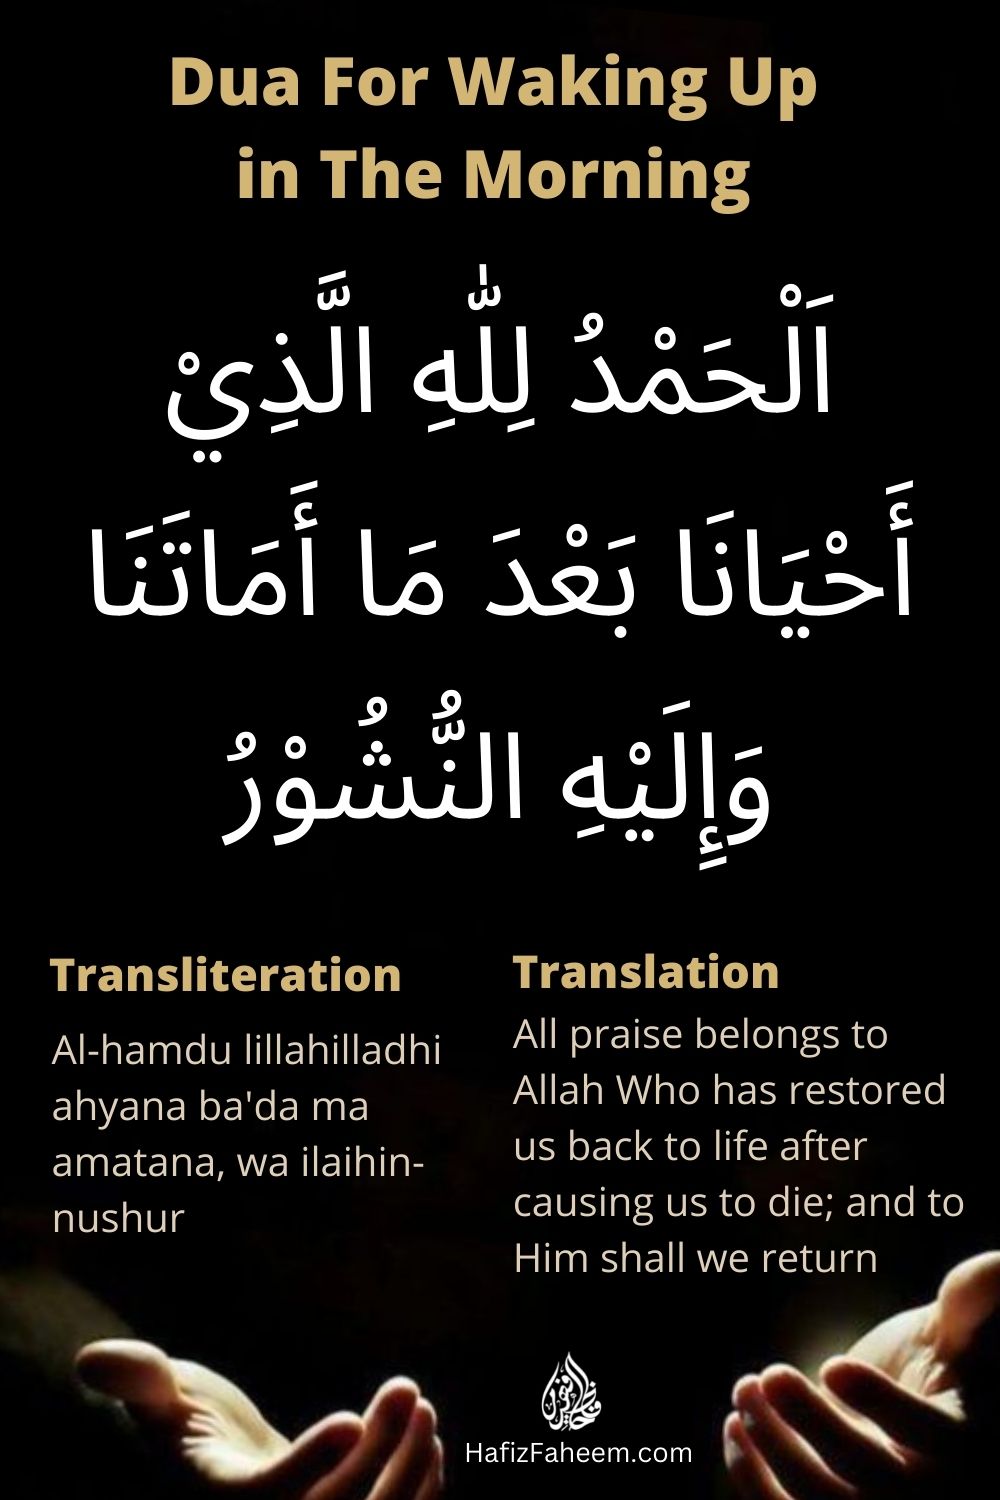 Dua for waking up in the morning